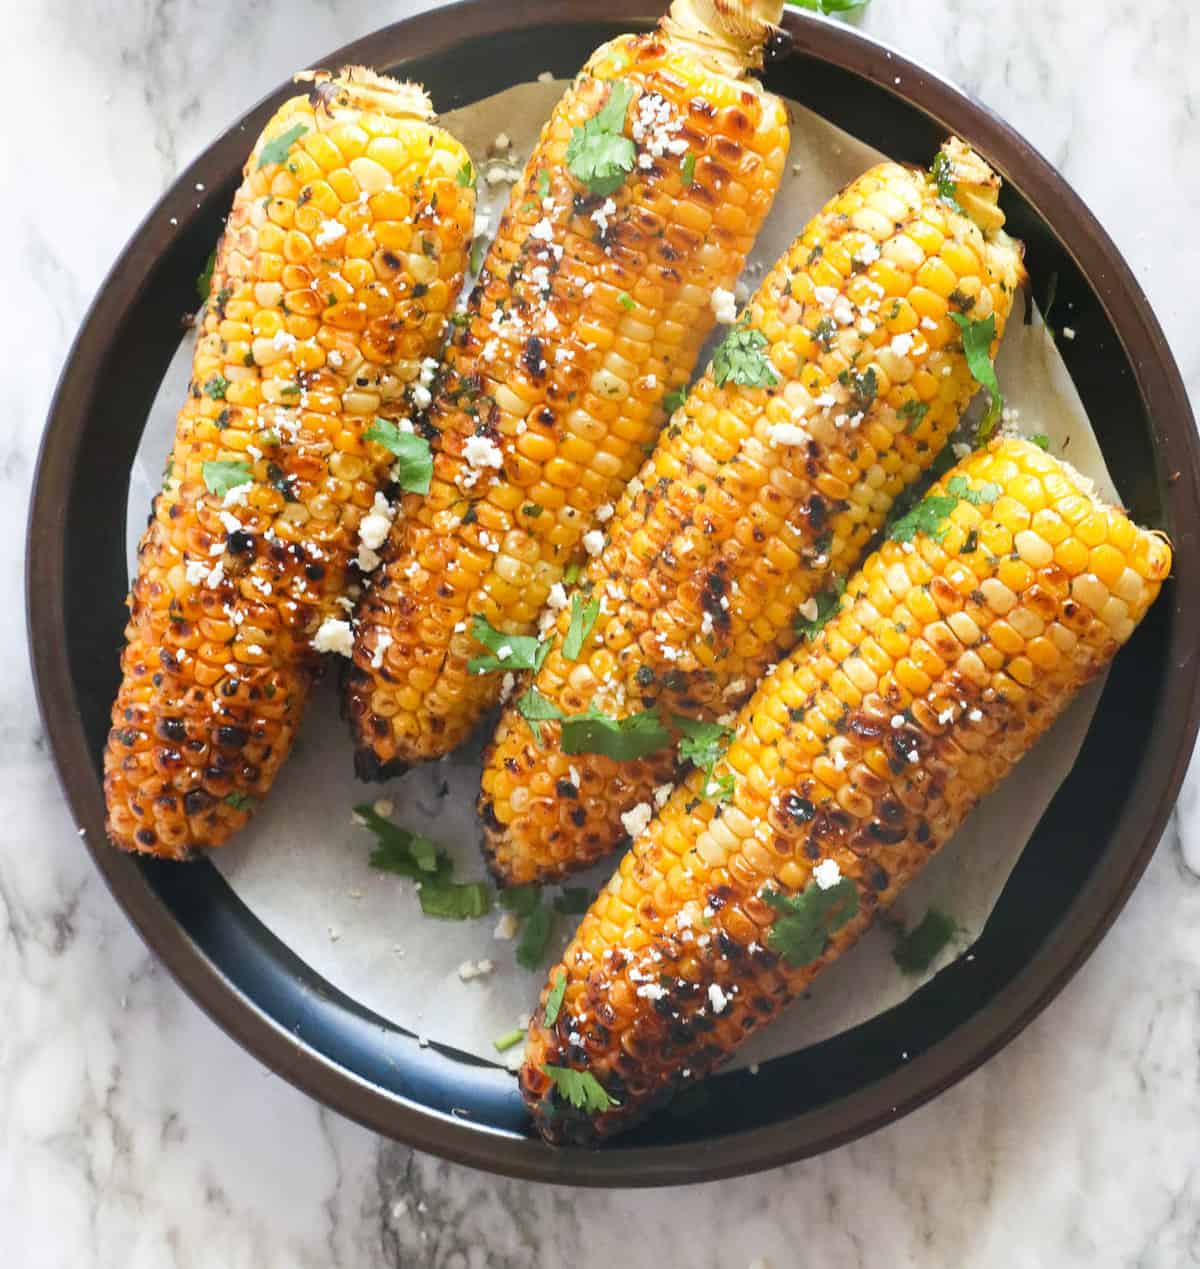 Grilled Corn on the Cob for Picnic